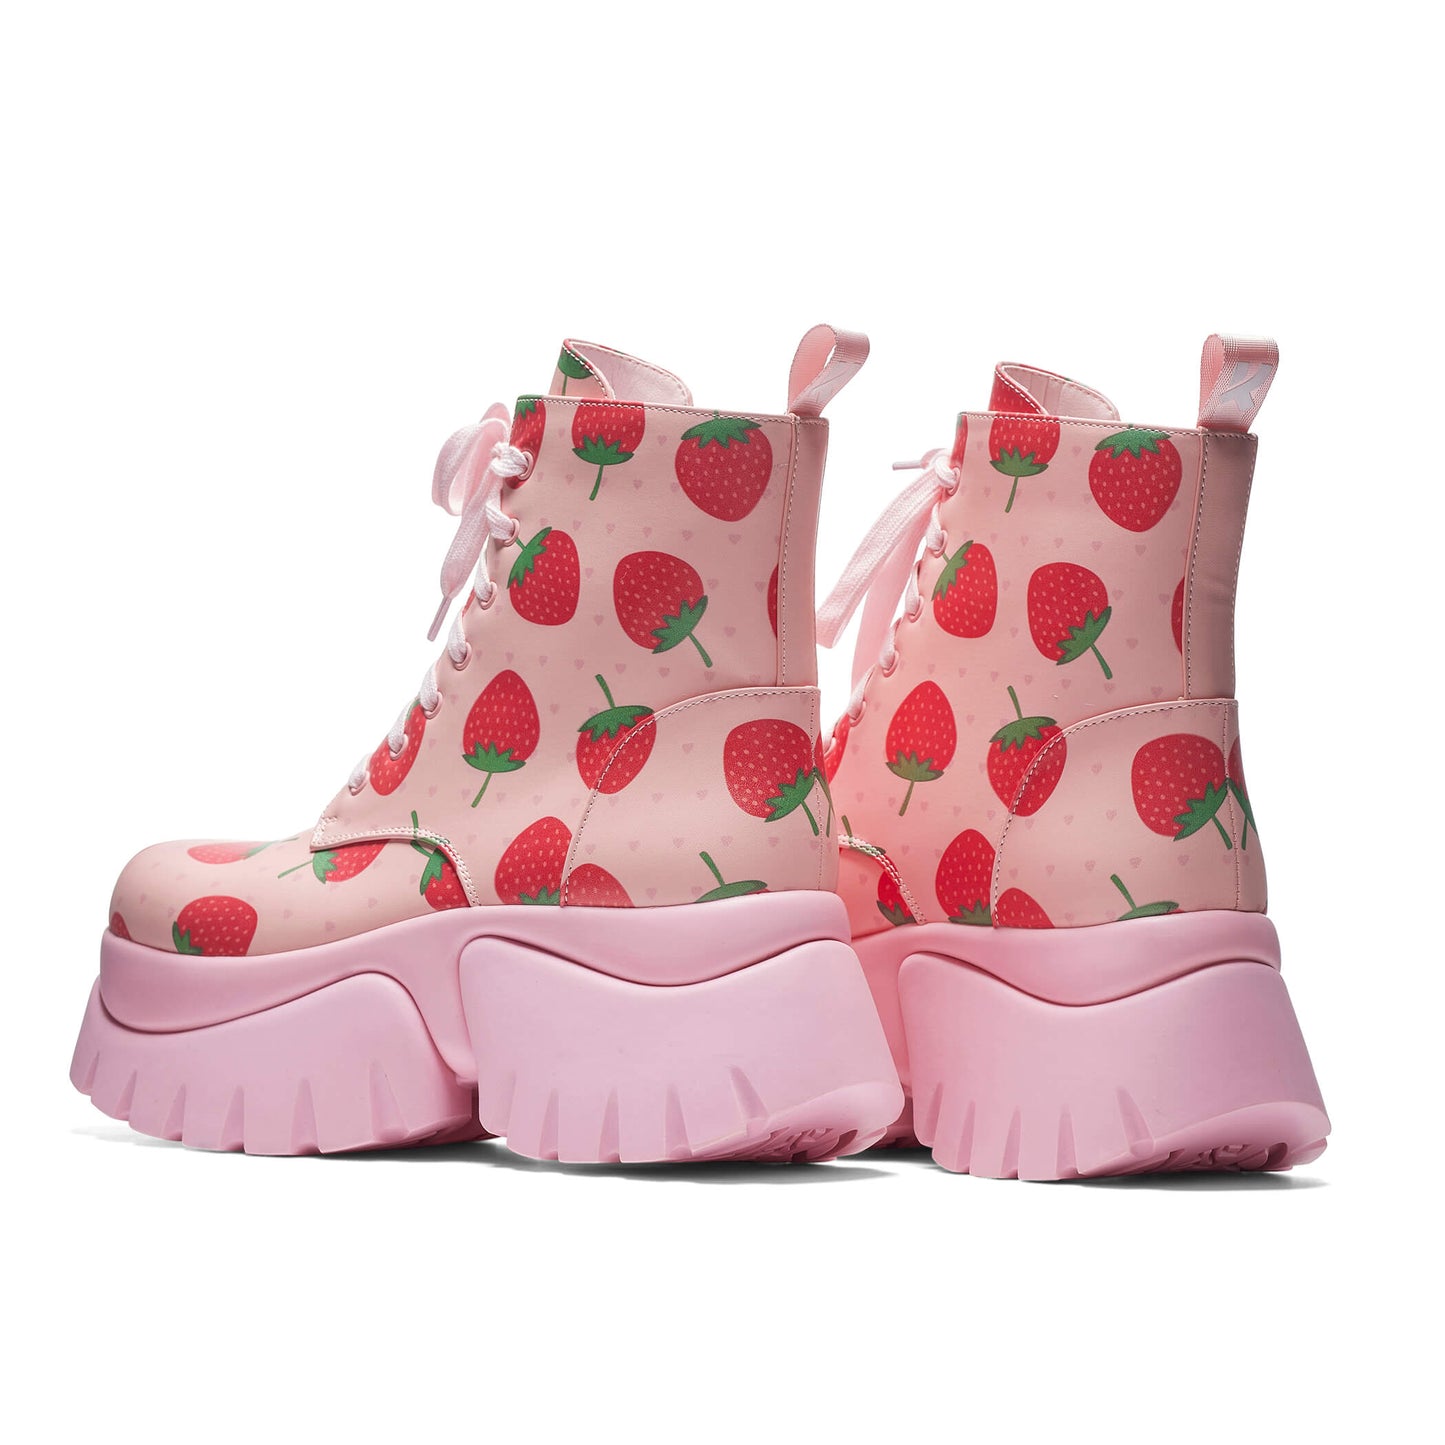 Strawberry Shortcake Pink Vilun Boots - Ankle Boots - KOI Footwear - Pink - Back View